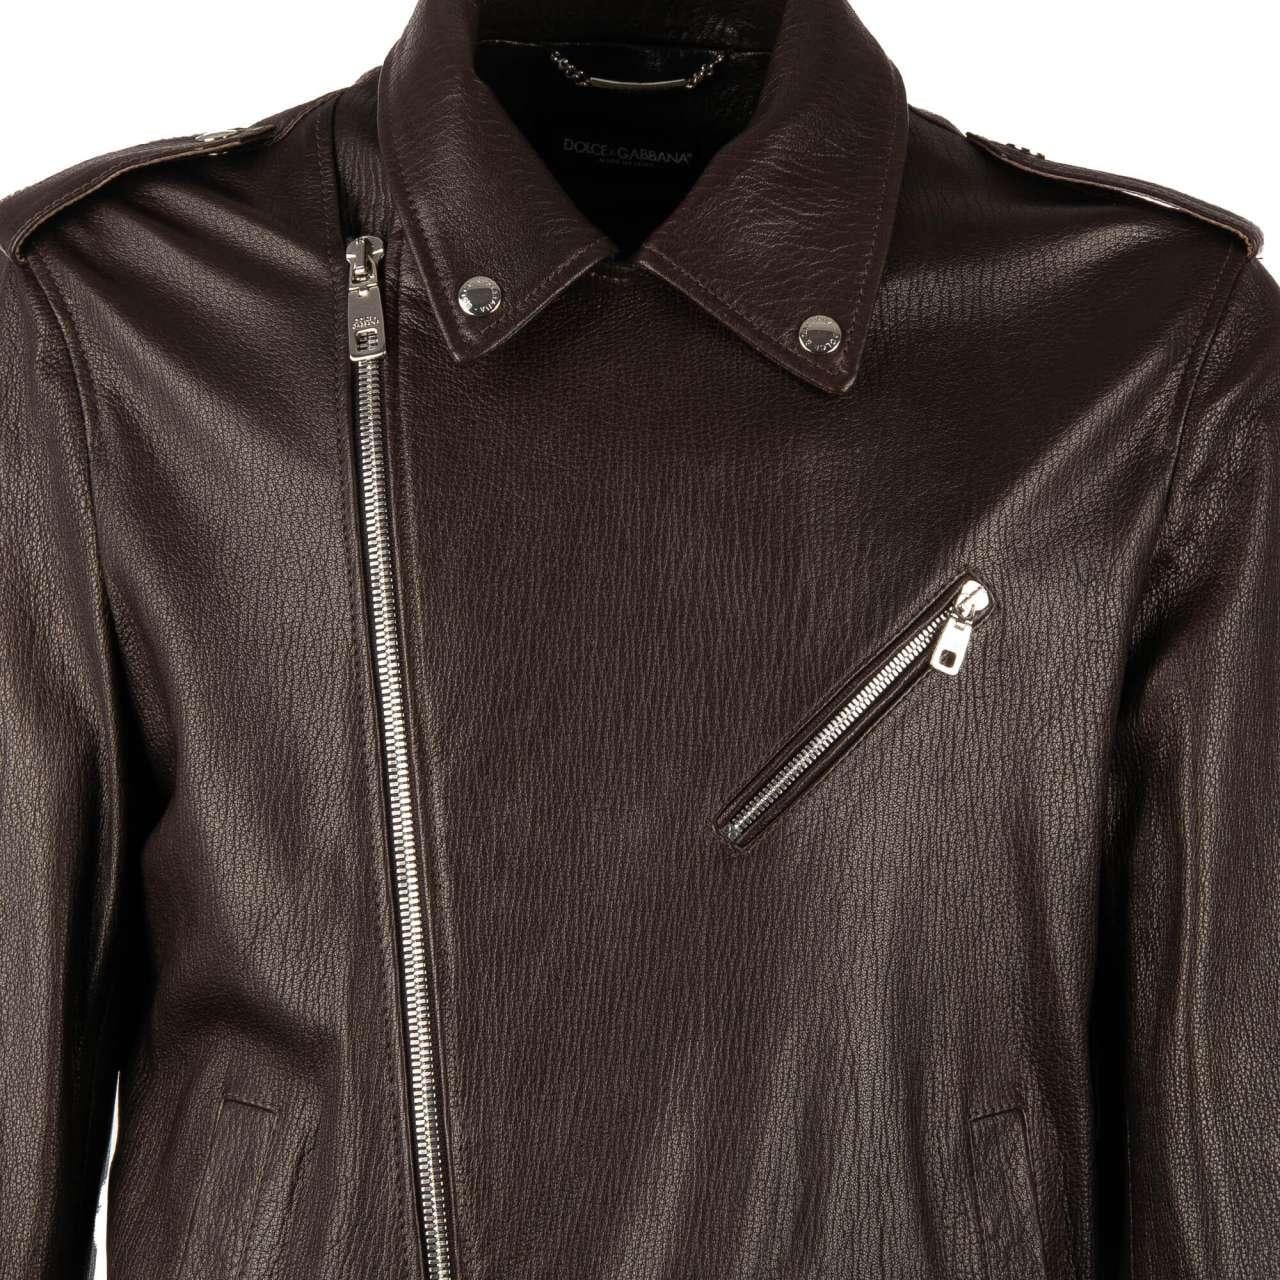 Dolce & Gabbana - Biker Leather Jacket with many Pockets Brown 46 For Sale 2